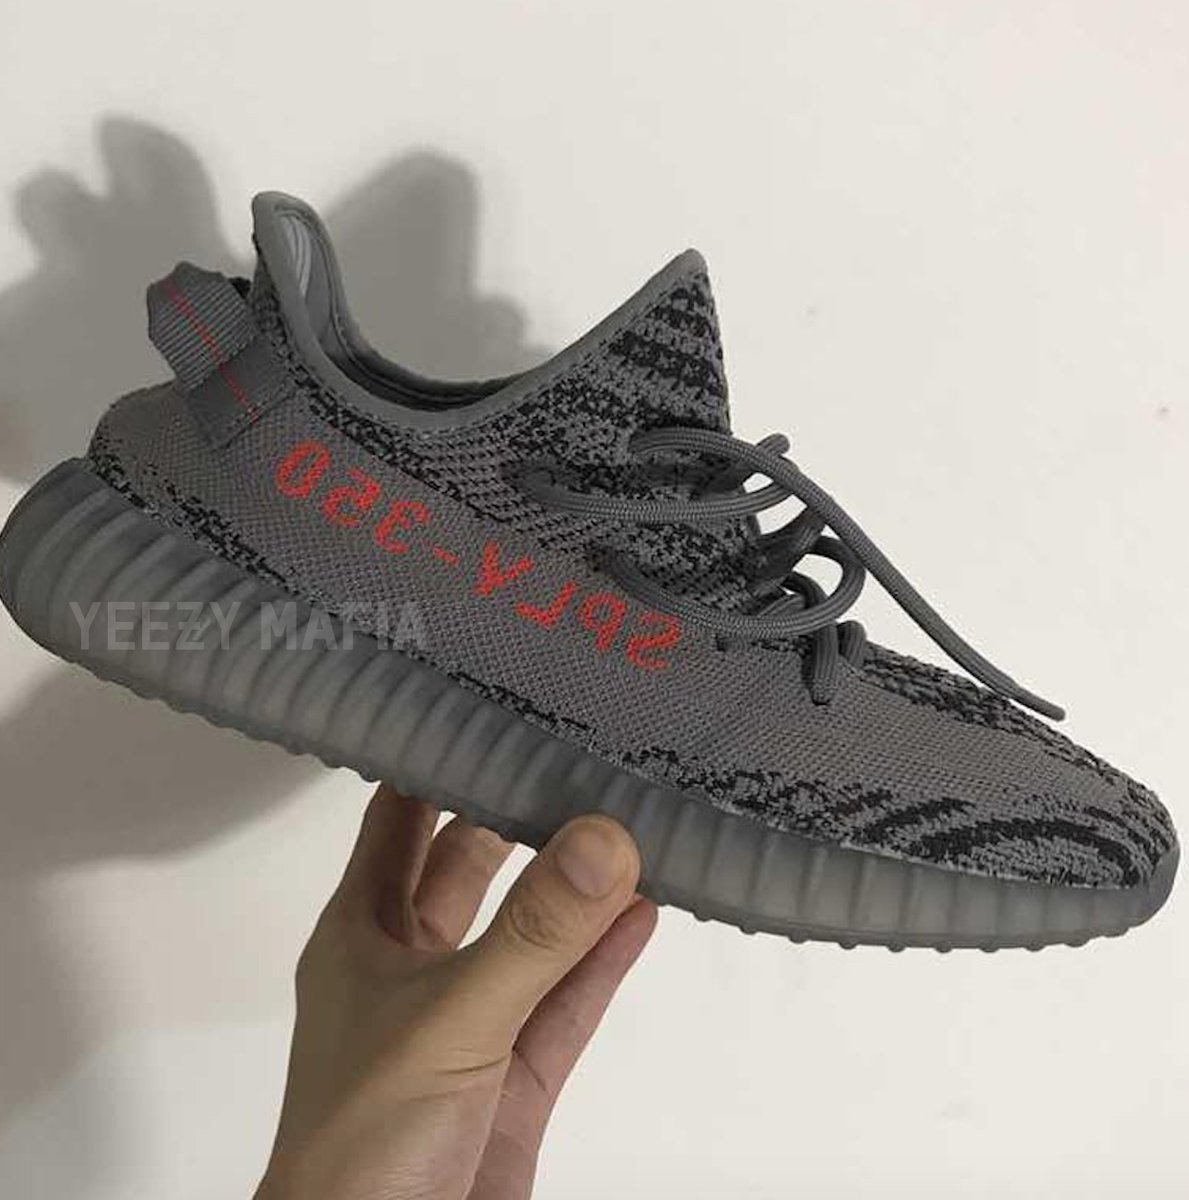 Adidas Yeezy Boost 350 V2 'Beluga 2.0' - Quick Look and Release Date1